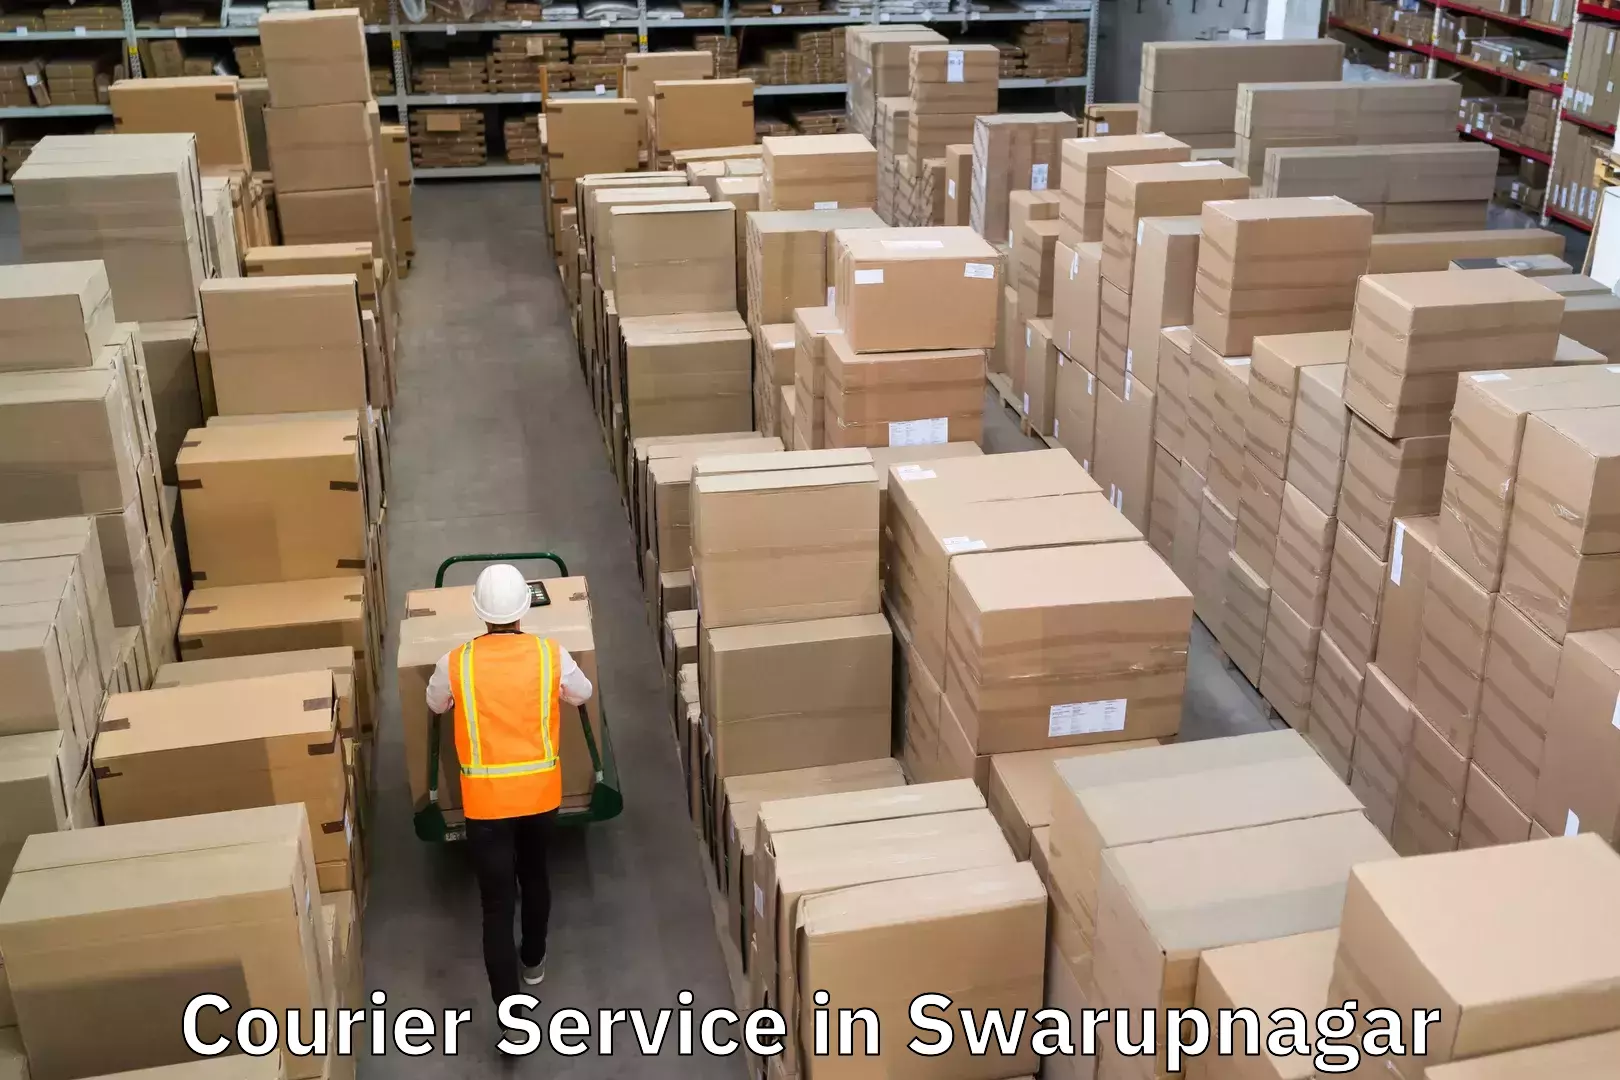 Small business couriers in Swarupnagar